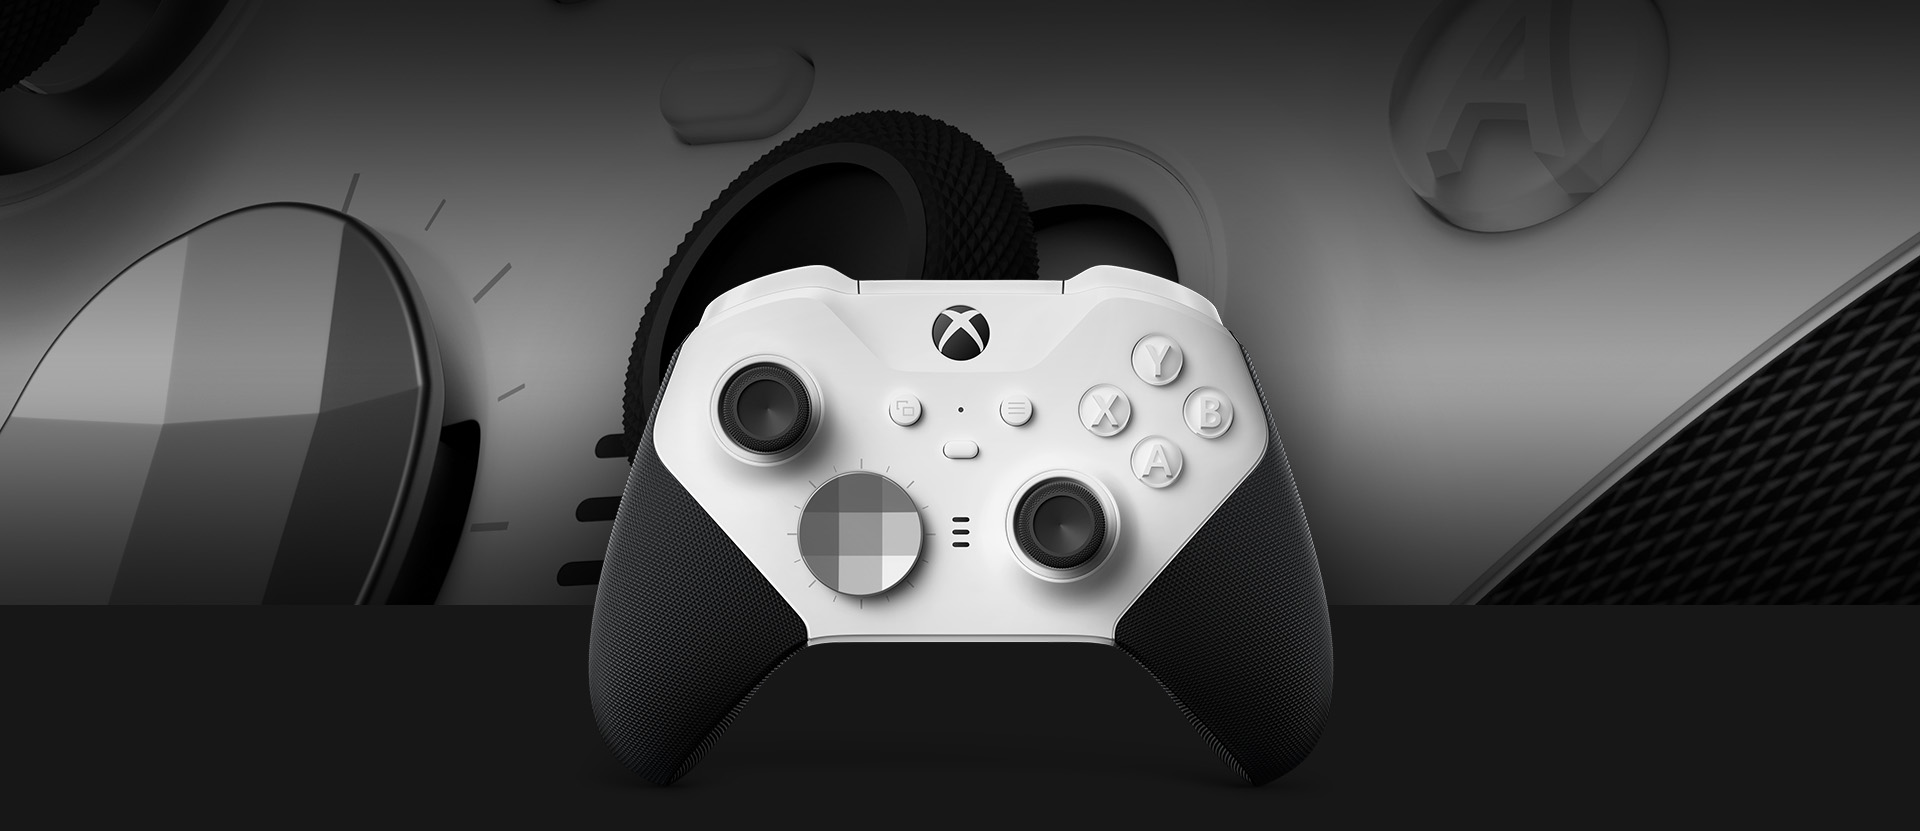 Front view of the Xbox Elite Wireless Controller Series 2 – Core (White) with a close-up of the controller in the background